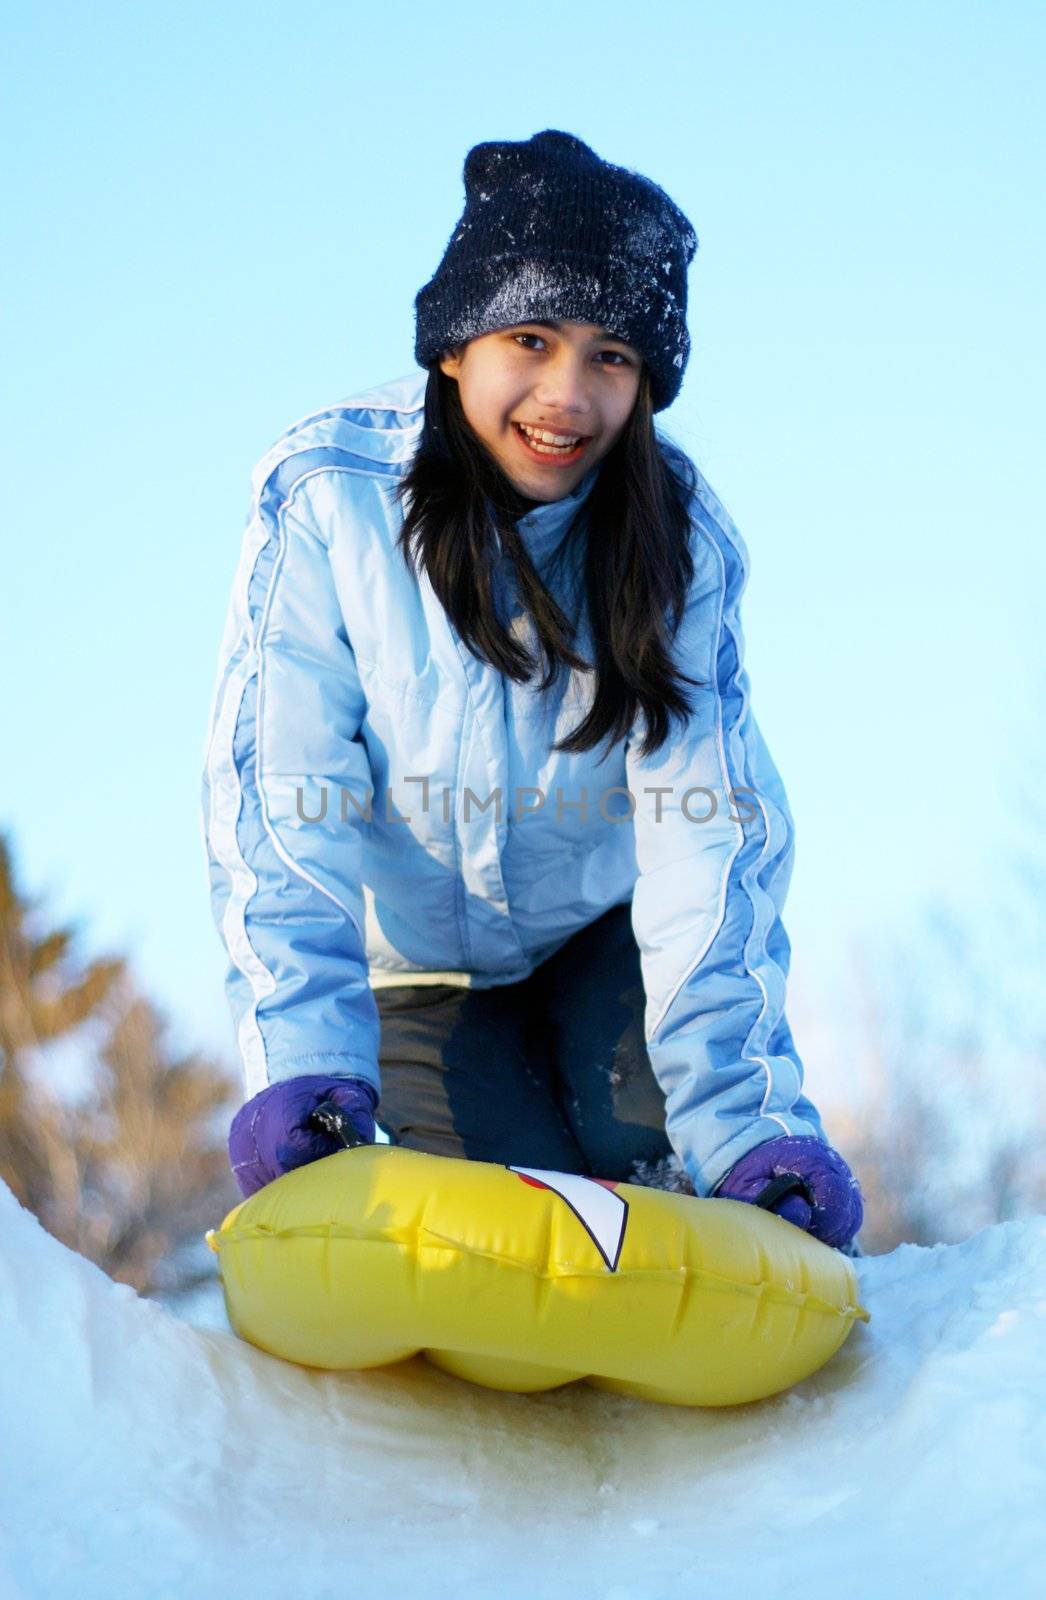 Young teen girl sledding down hill by jarenwicklund